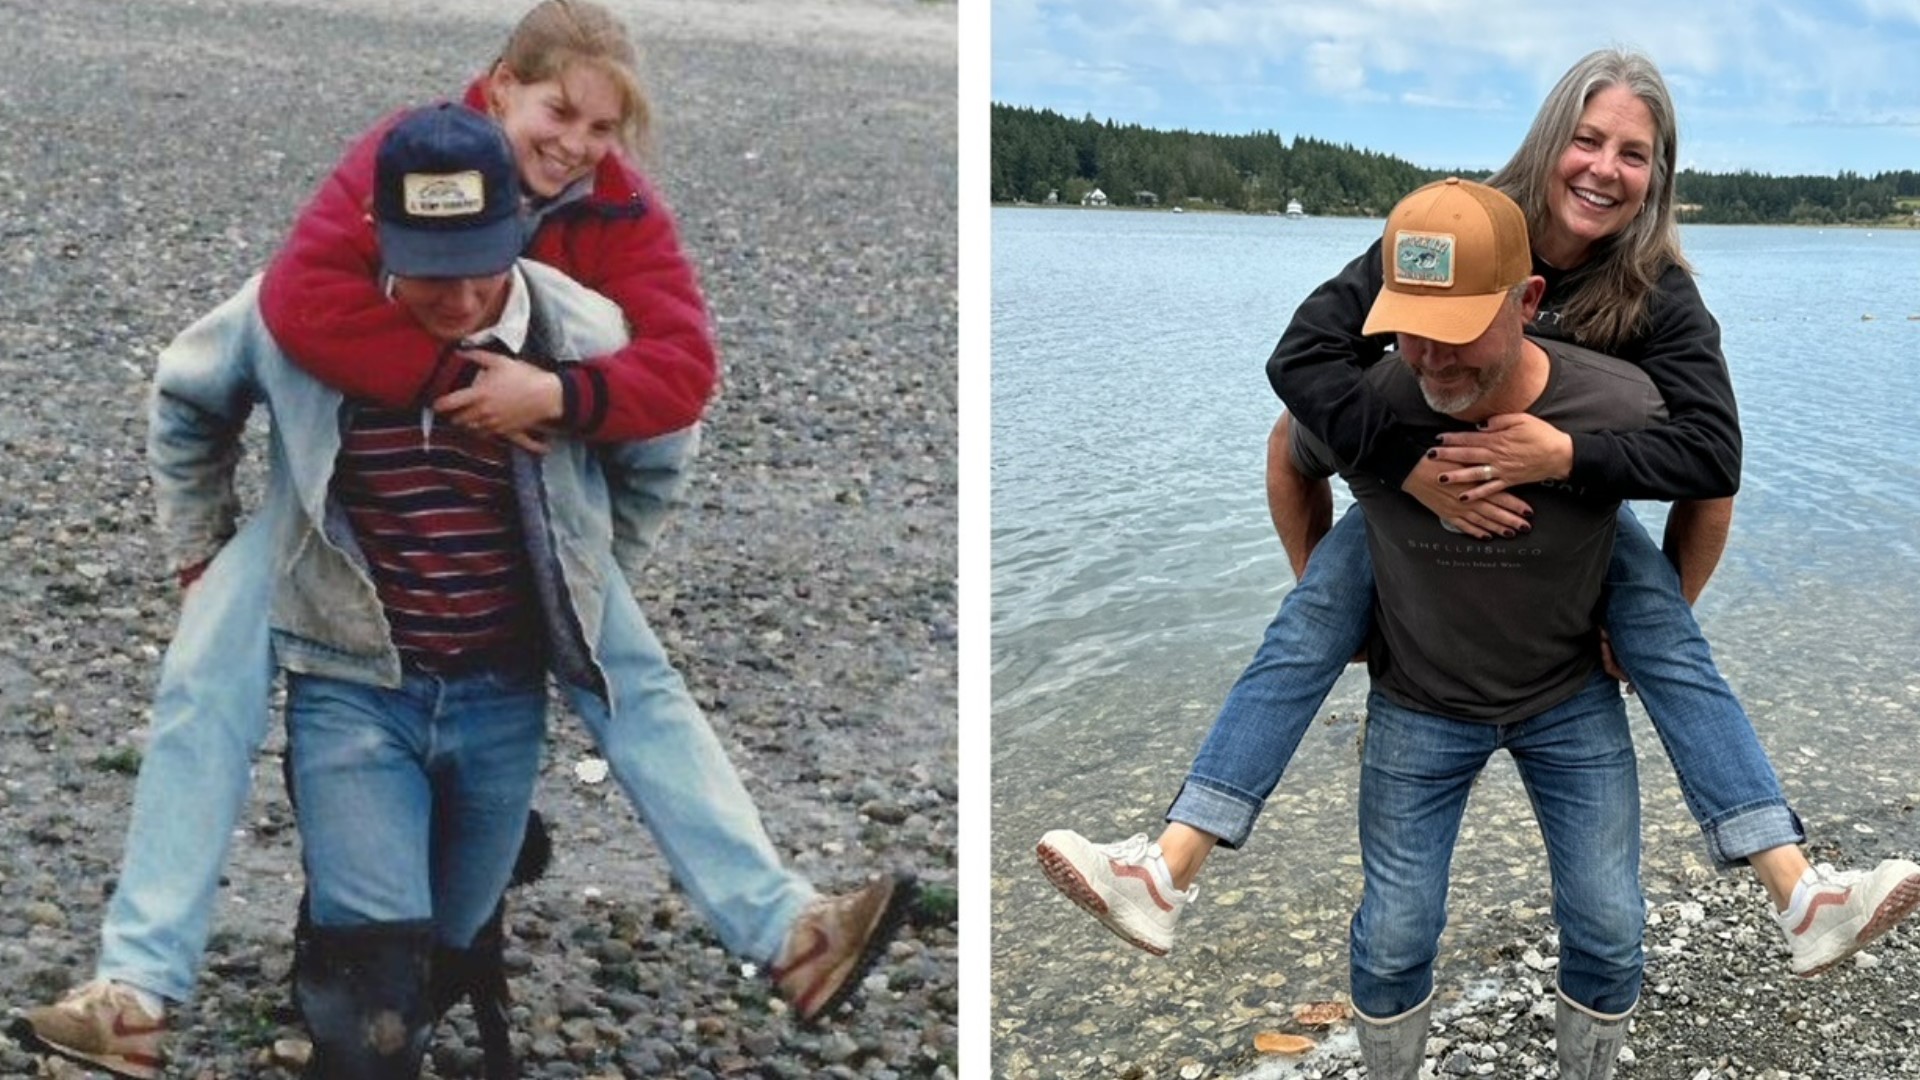 Erik and Andrea Anderson restored Westcott Bay Shellfish Co. more than 30 years after they first visited while dating. #k5evening